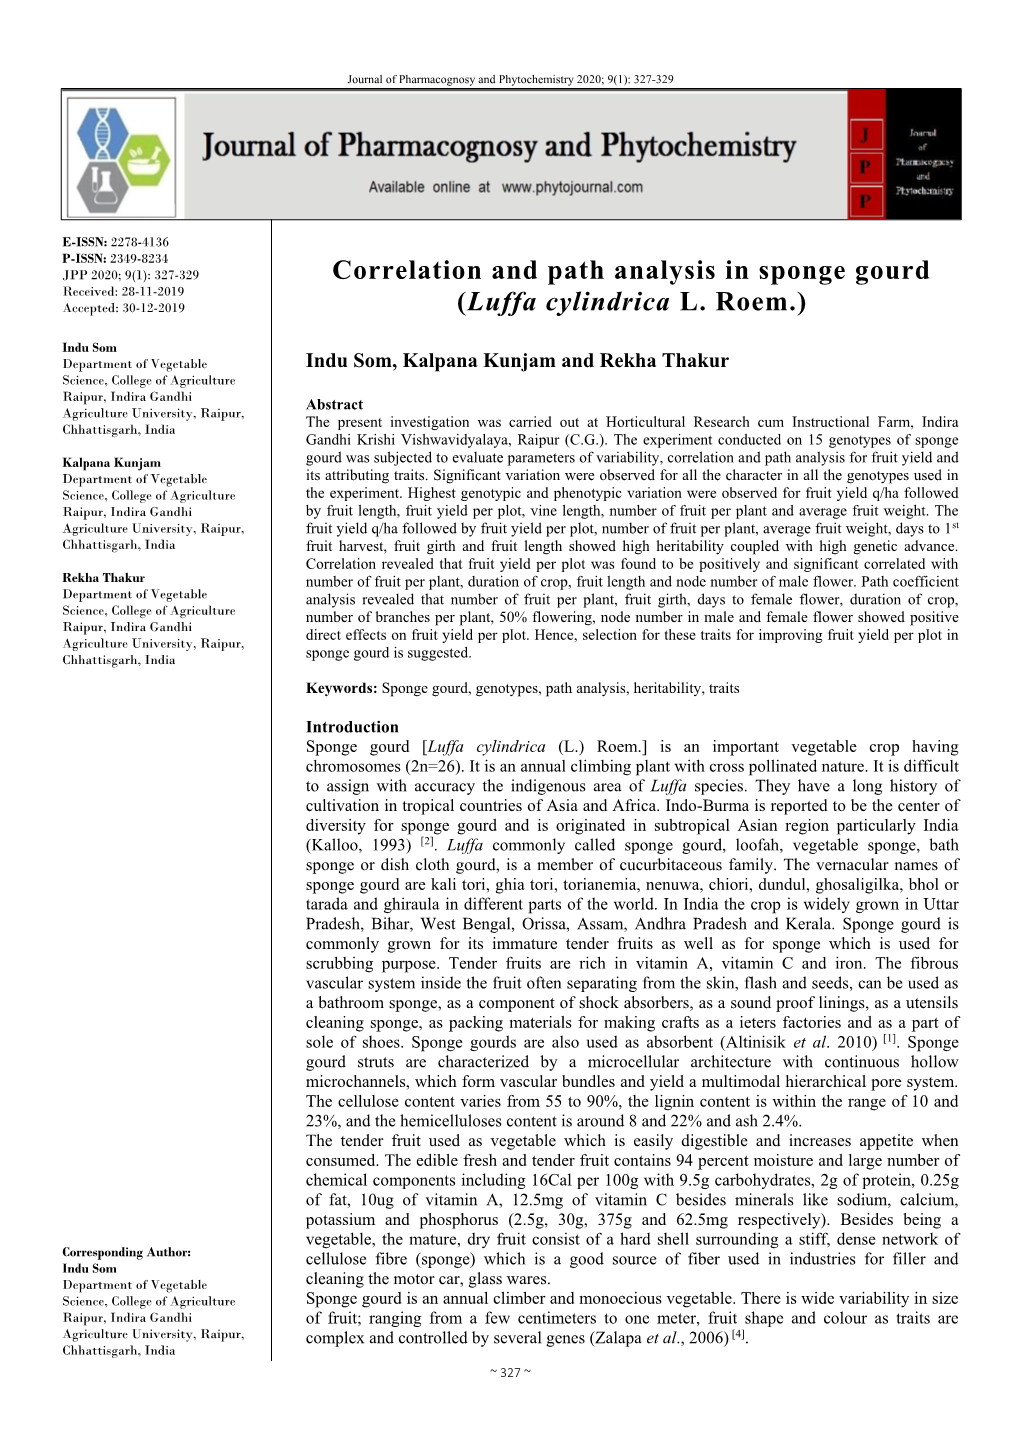 Correlation and Path Analysis in Sponge Gourd (Luffa Cylindrica L